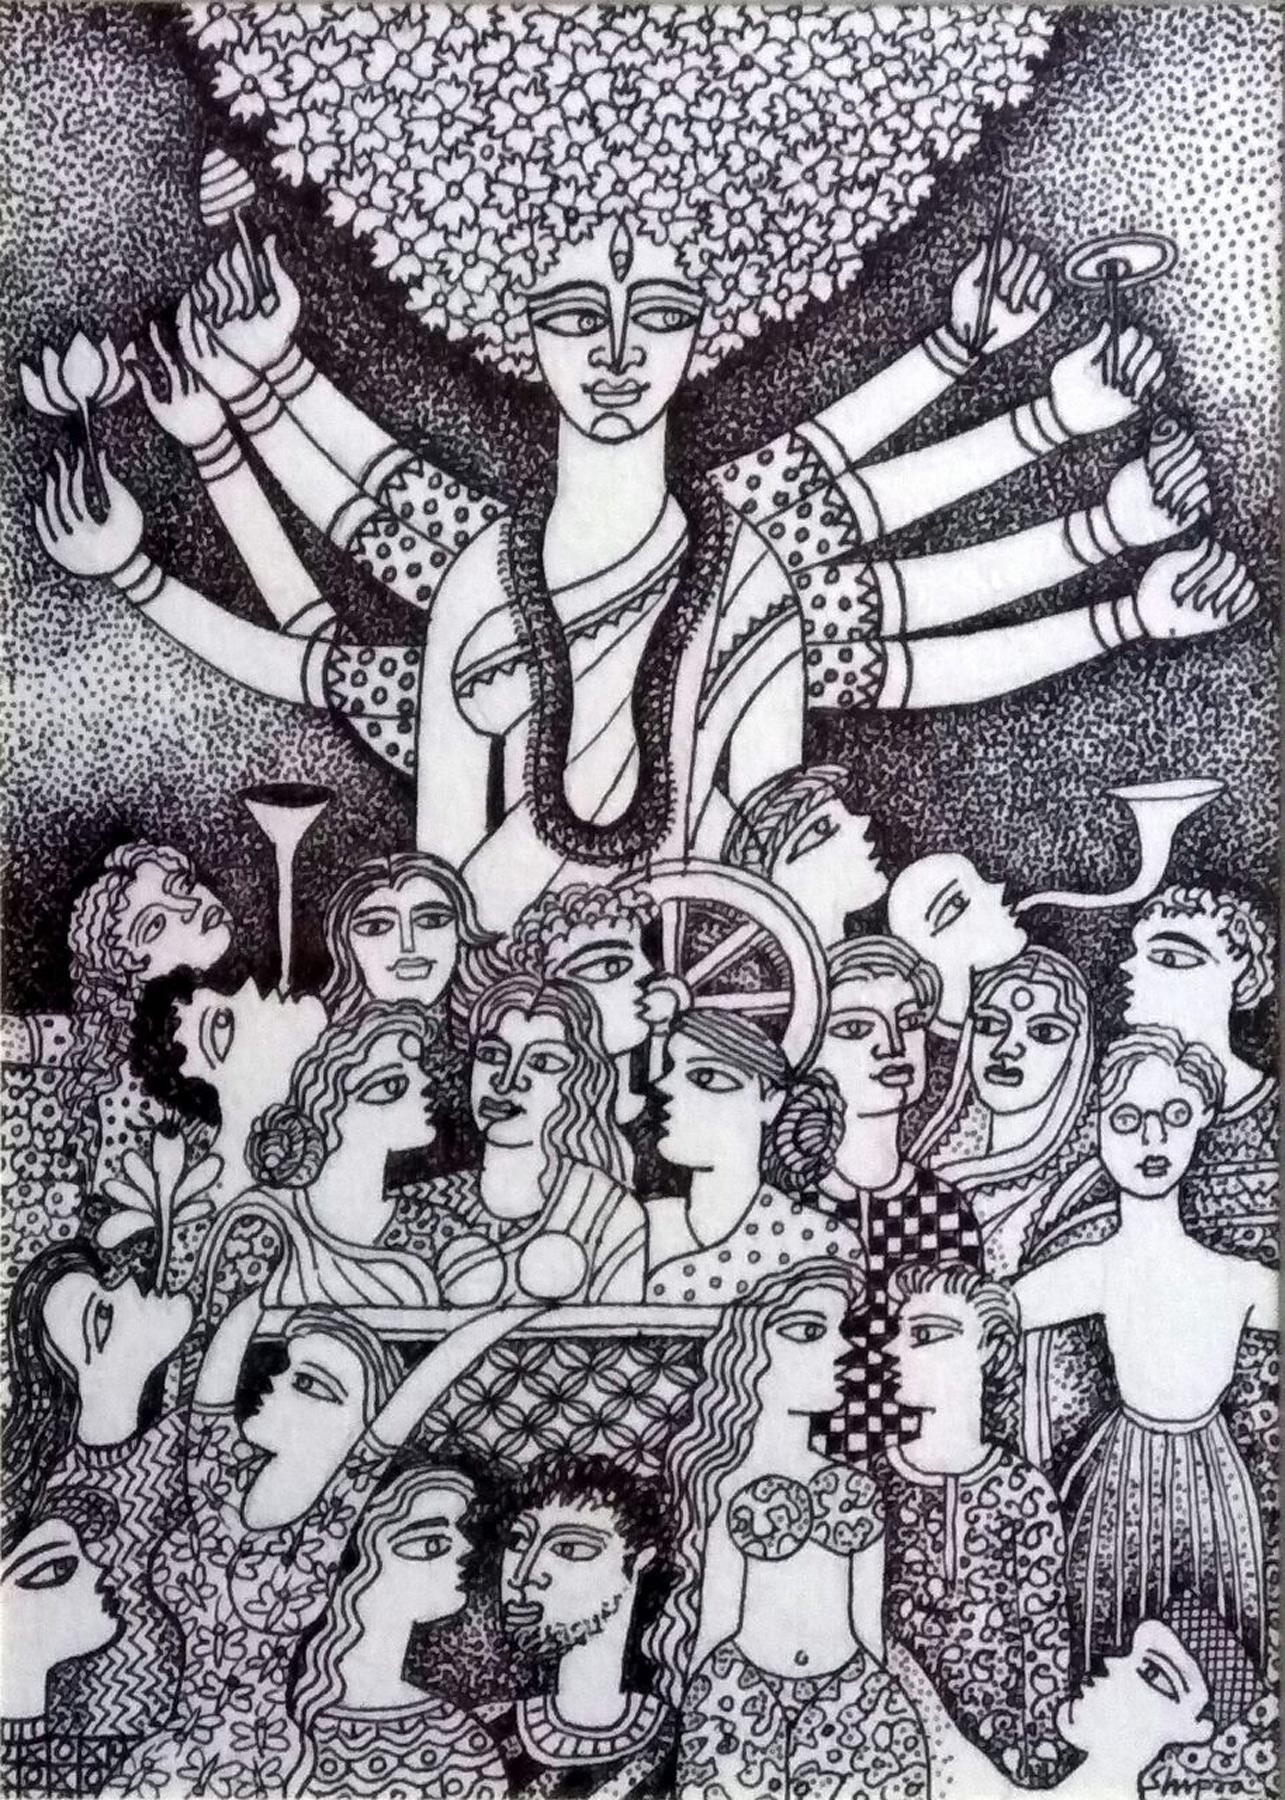 Shipra Bhattacharya Figurative Painting - Indian Art; celebrating Indian goddess Durga, the destroyer by Ace Indian Artist